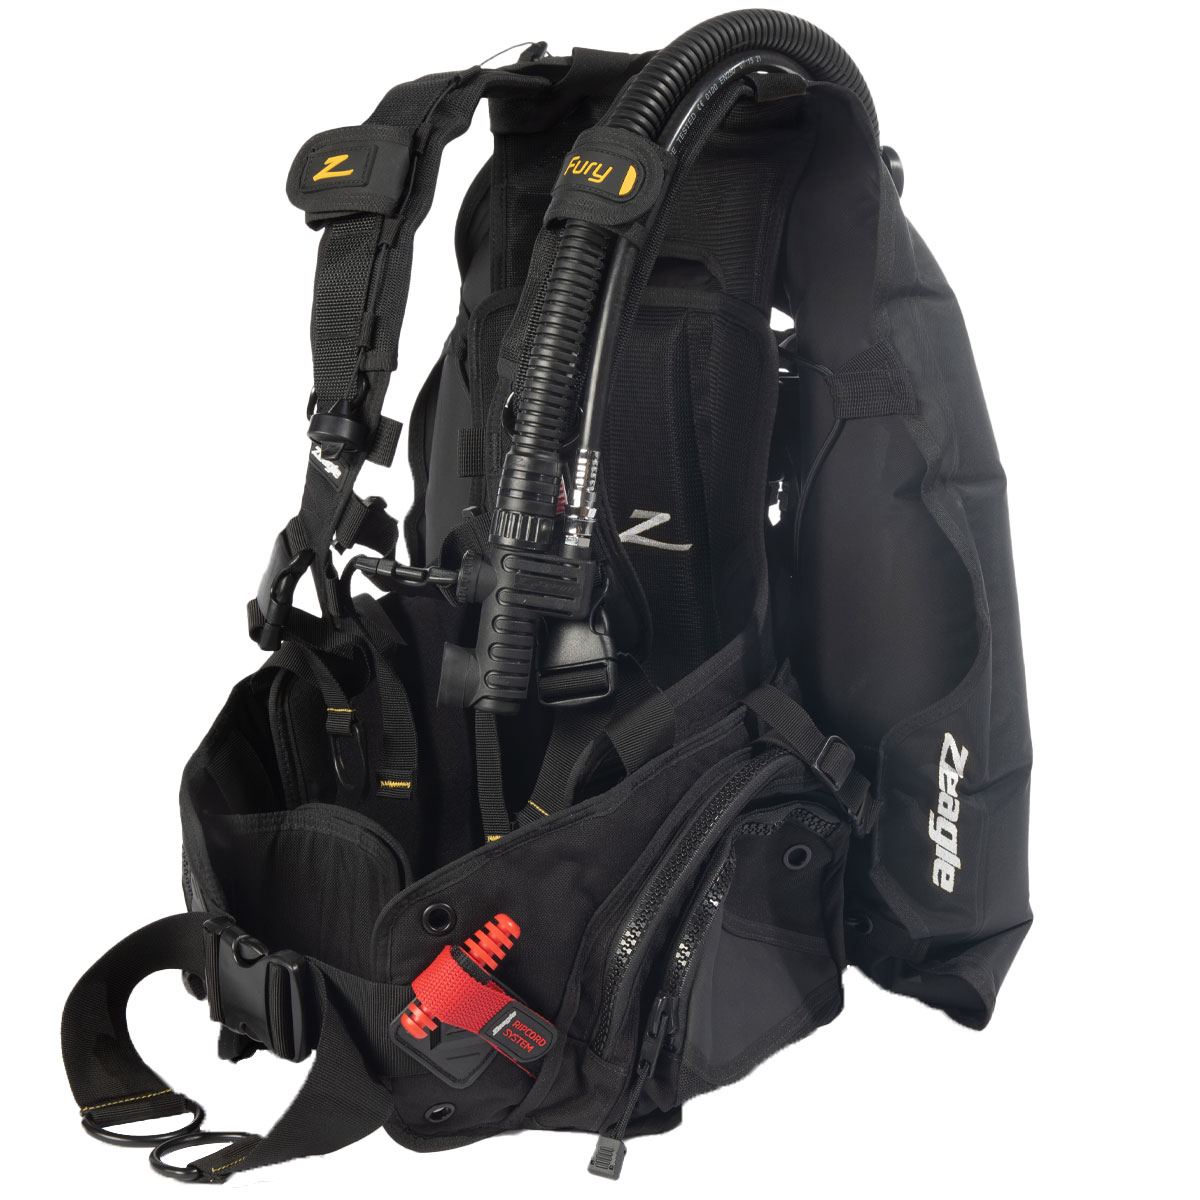 Zeagle Fury BCD with Ripcord